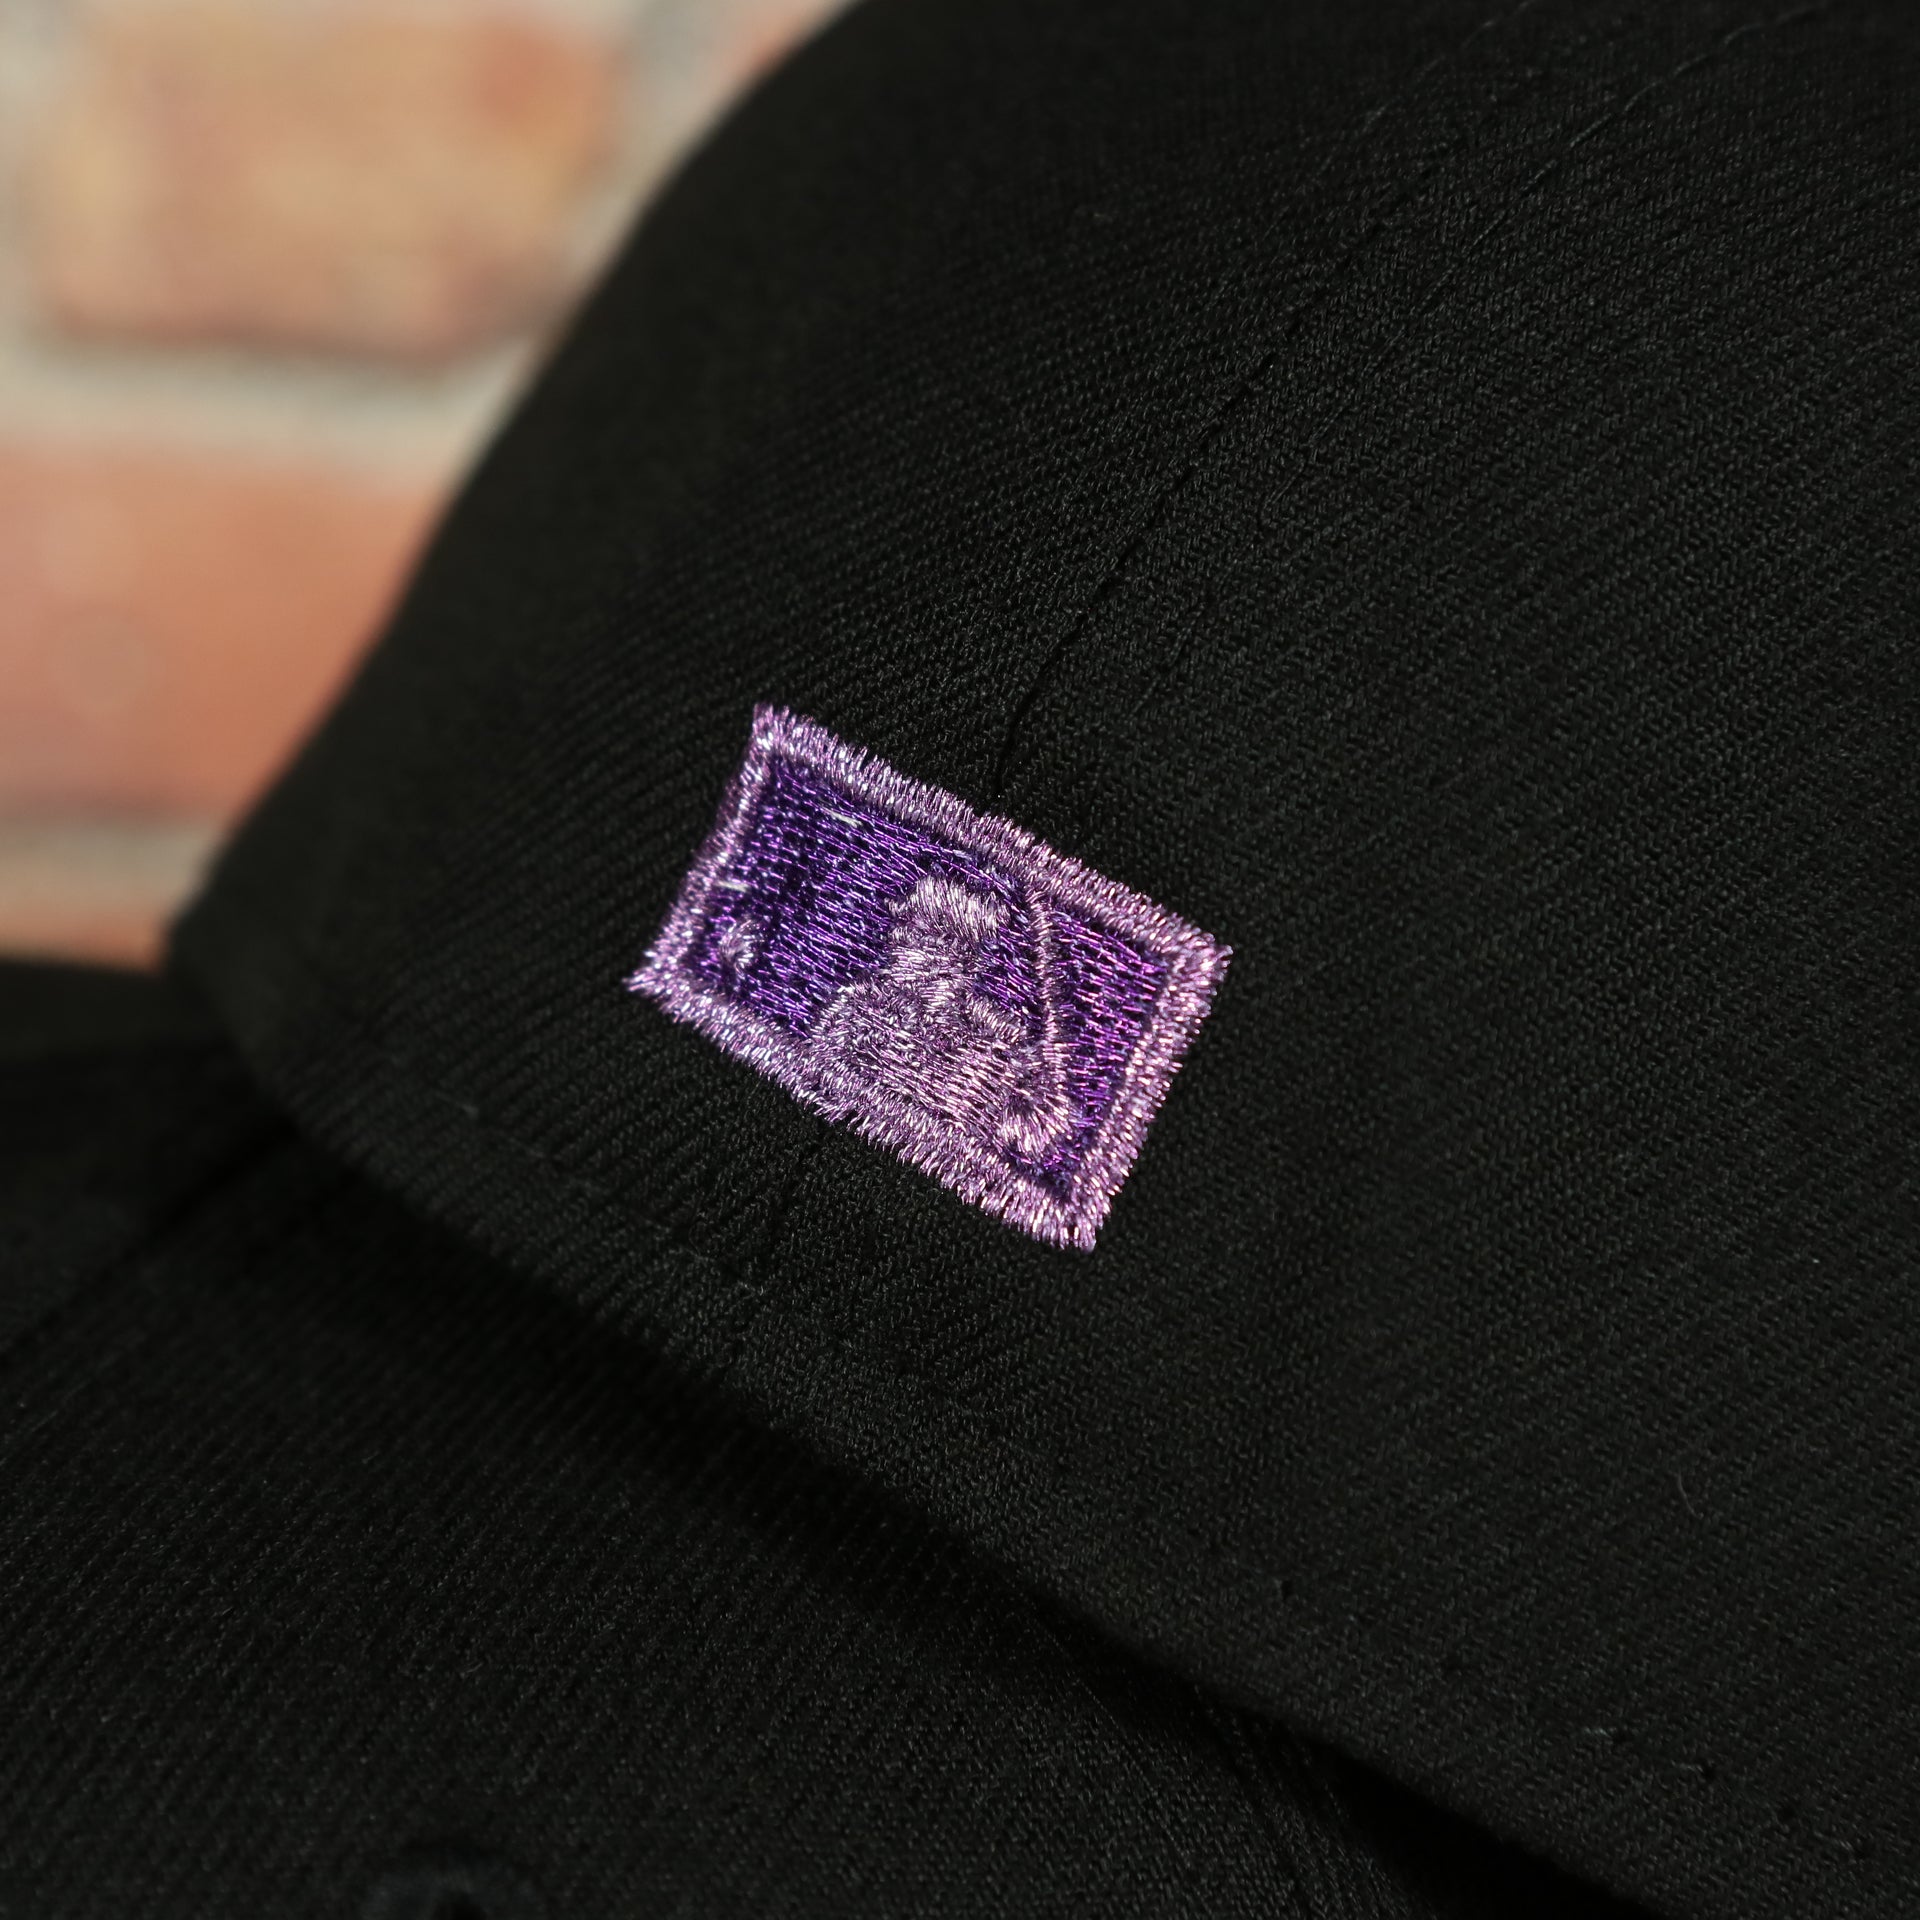 cooperstown batterman logo on the Chicago Cubs Cooperstown Metallic Pop Logo Lavender Bottom Black 59Fifty Fitted Cap